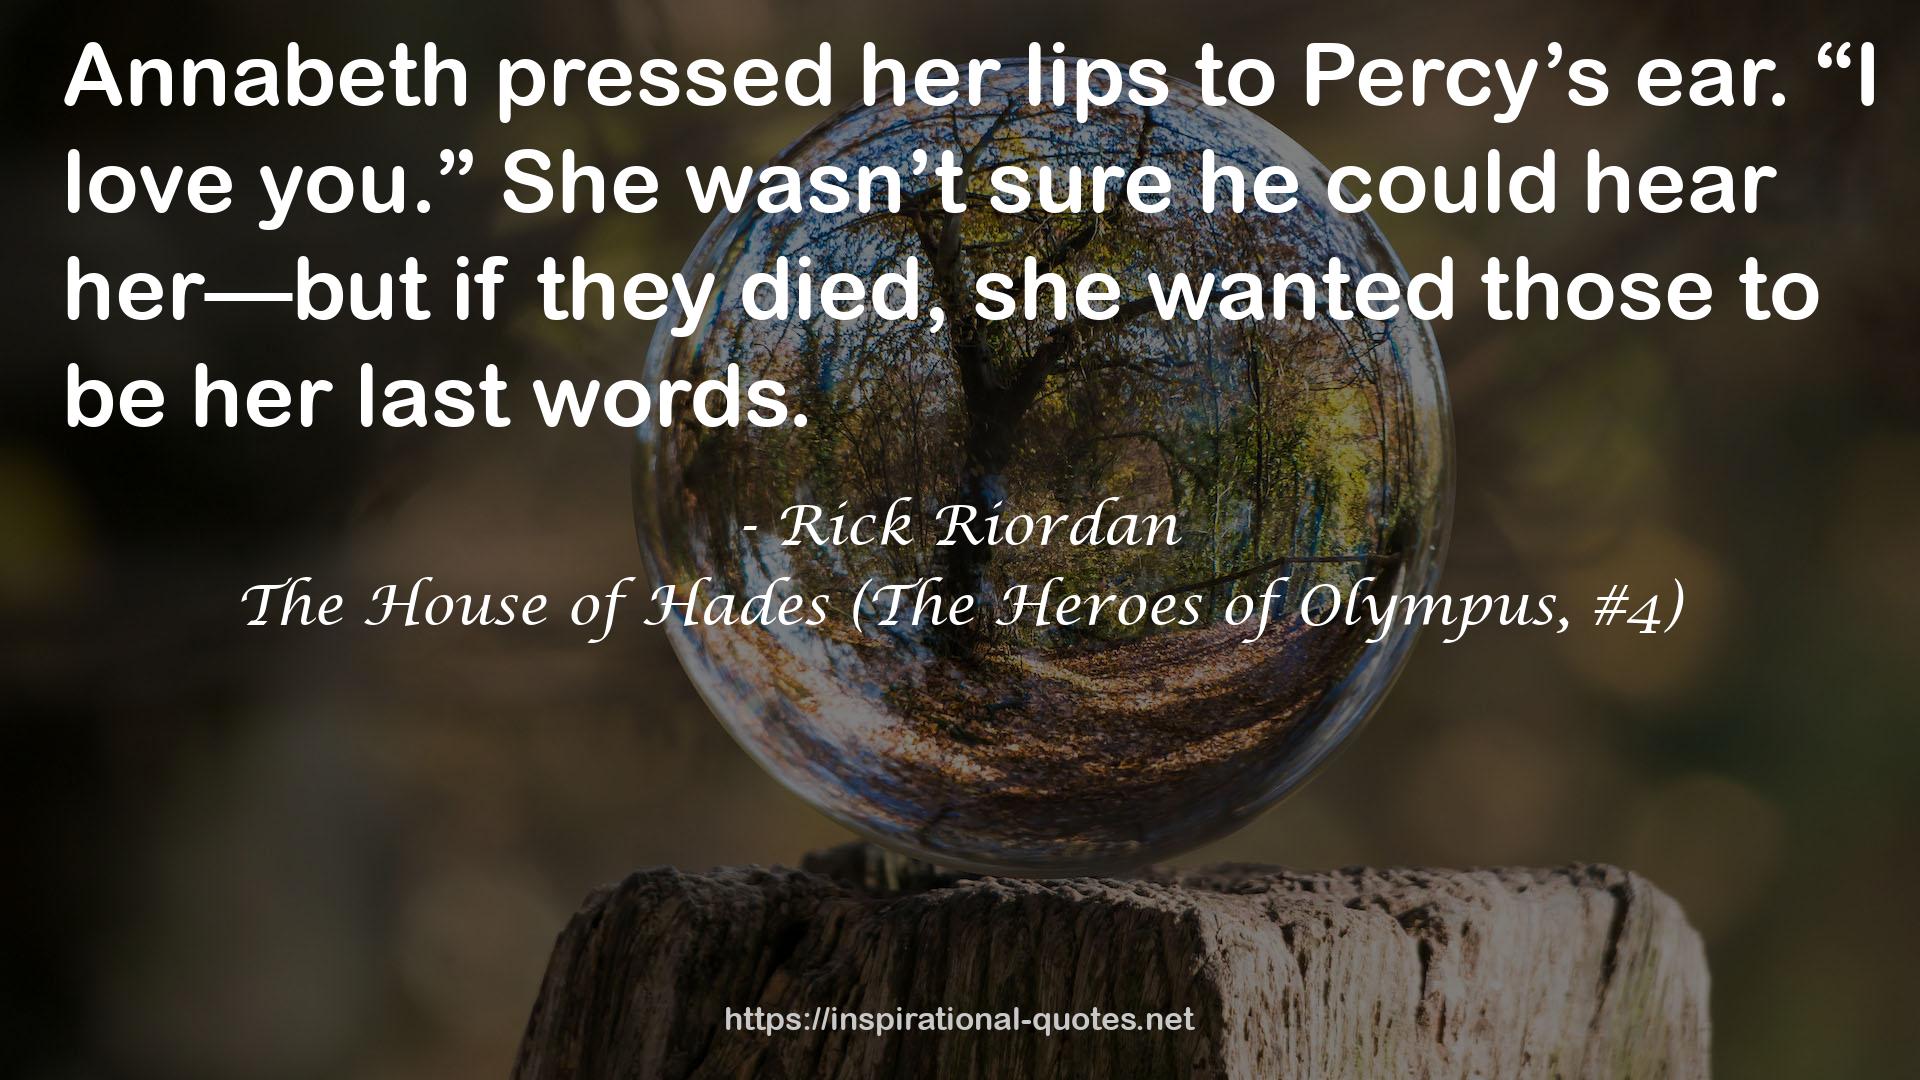 The House of Hades (The Heroes of Olympus, #4) QUOTES